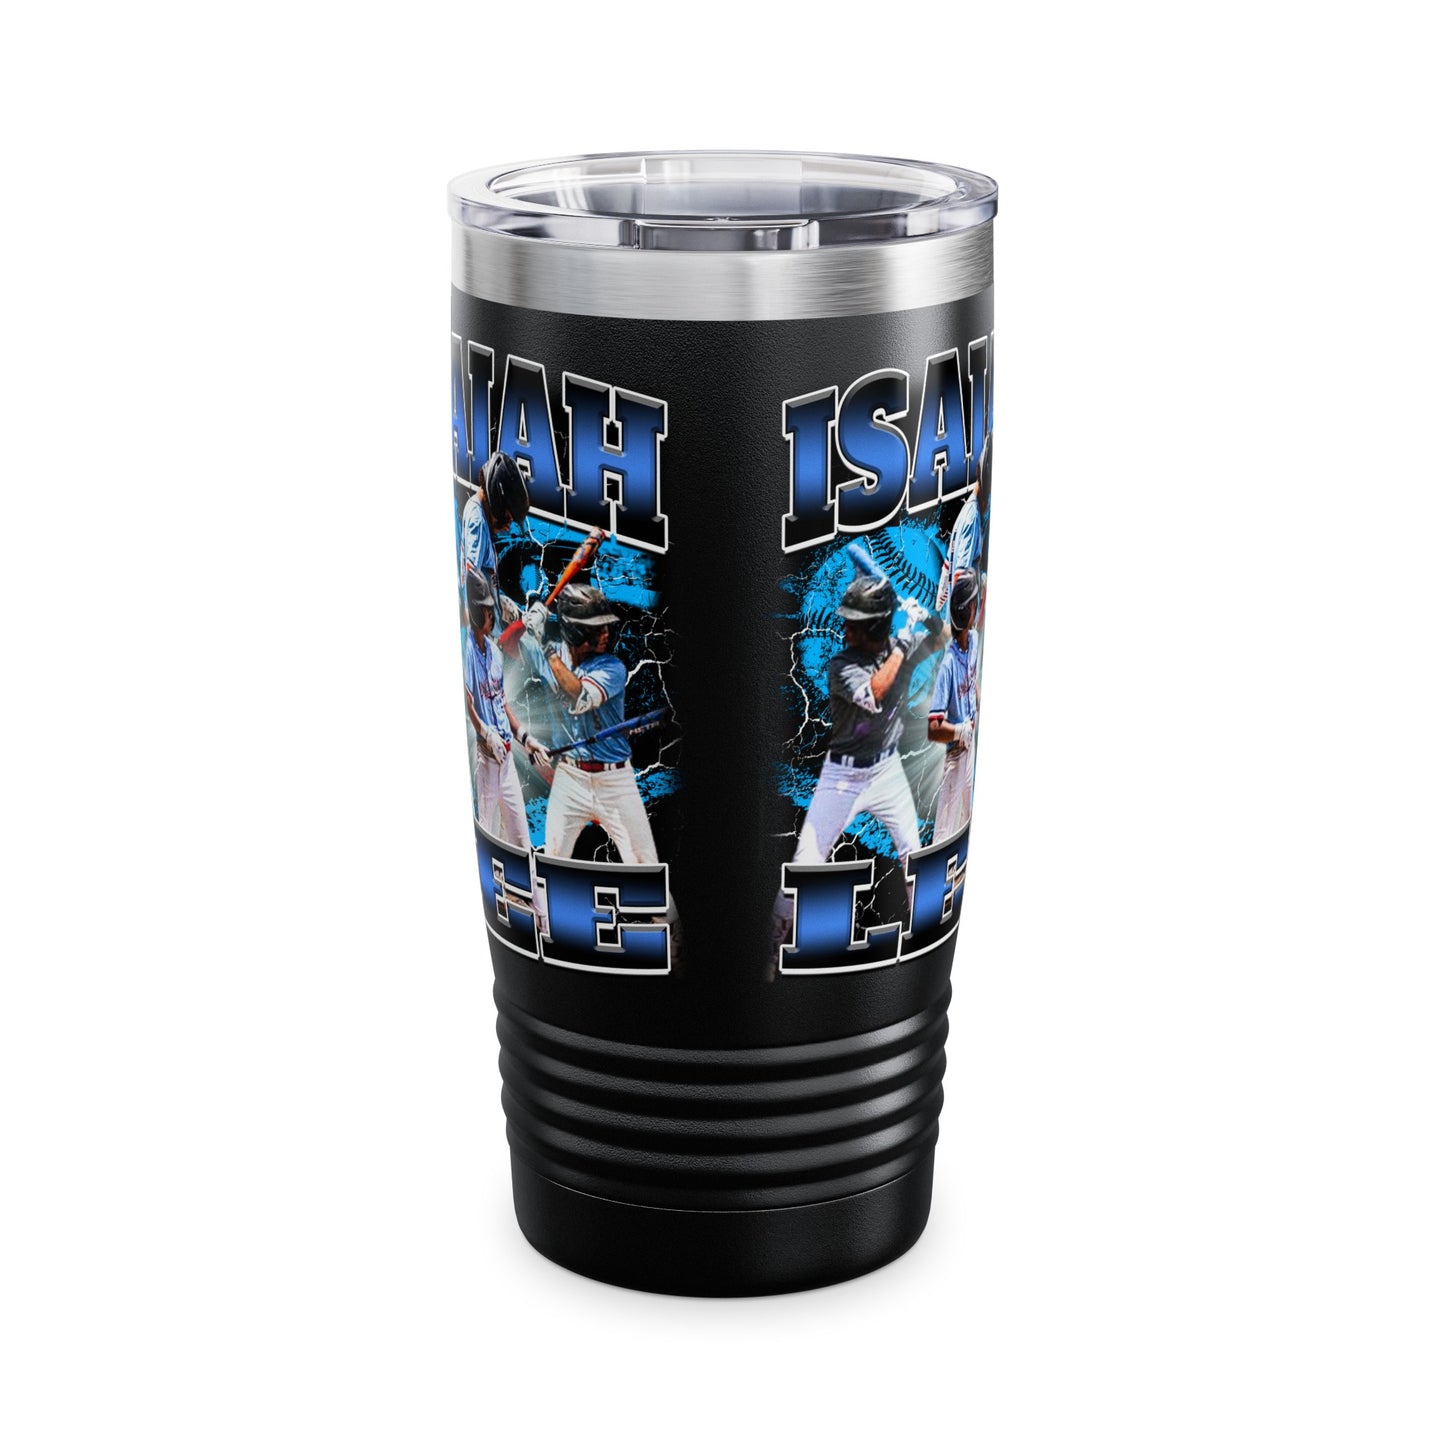 Isaiah Lee Stainless Steal Tumbler